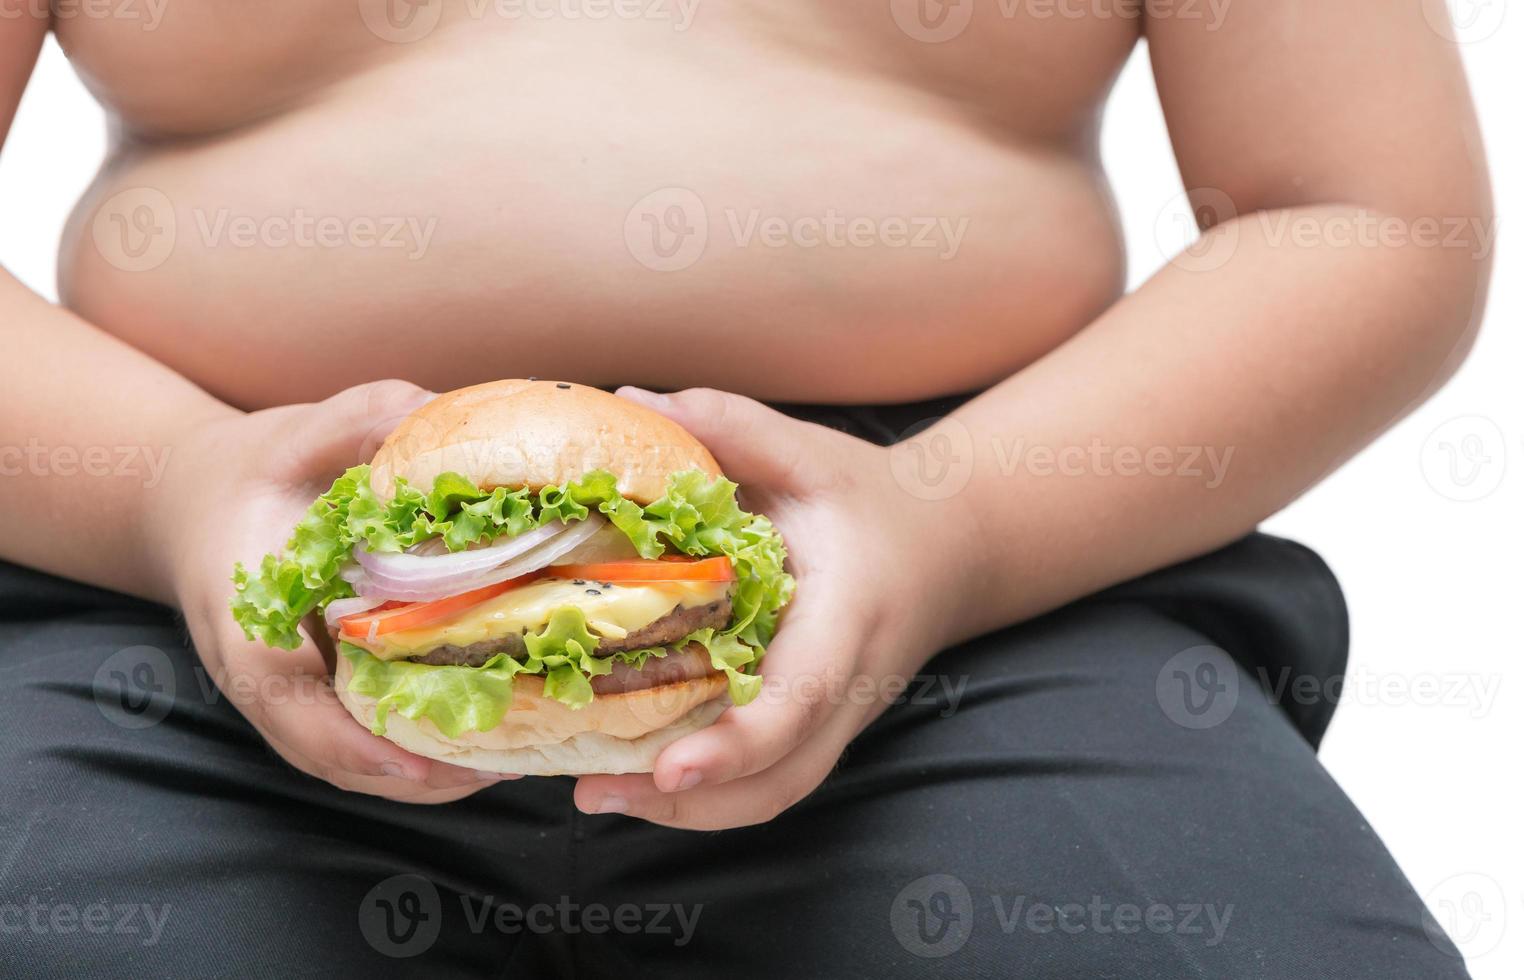 pork cheese Hamburger in obese fat boy hand isolated photo